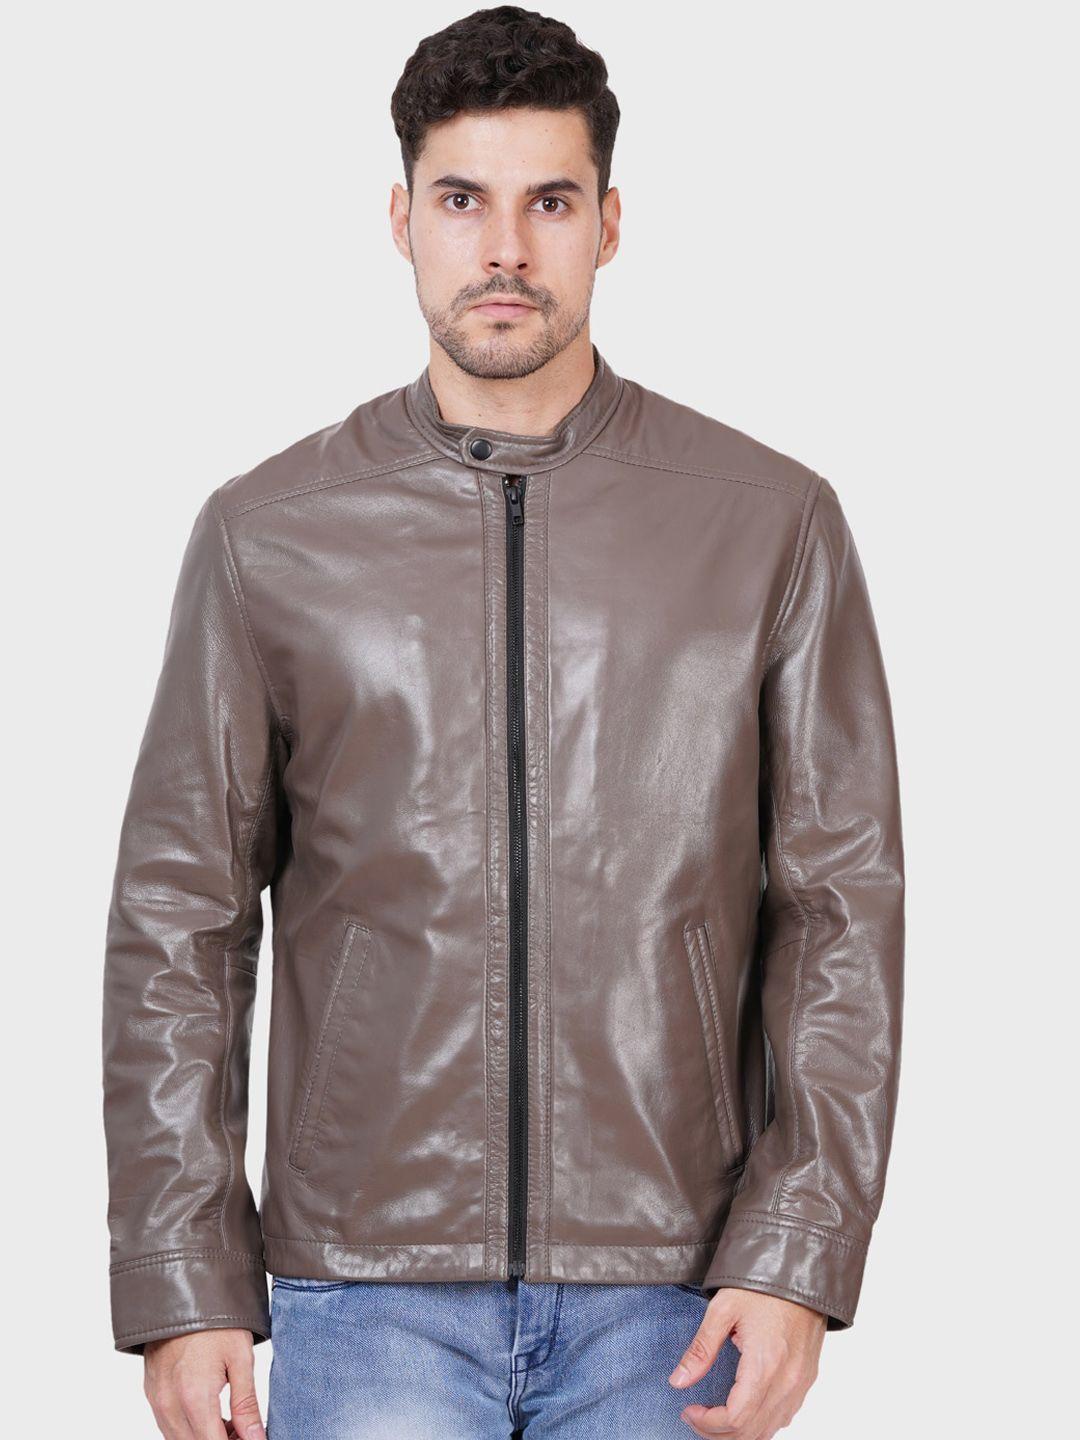 justanned stand collar leather jacket